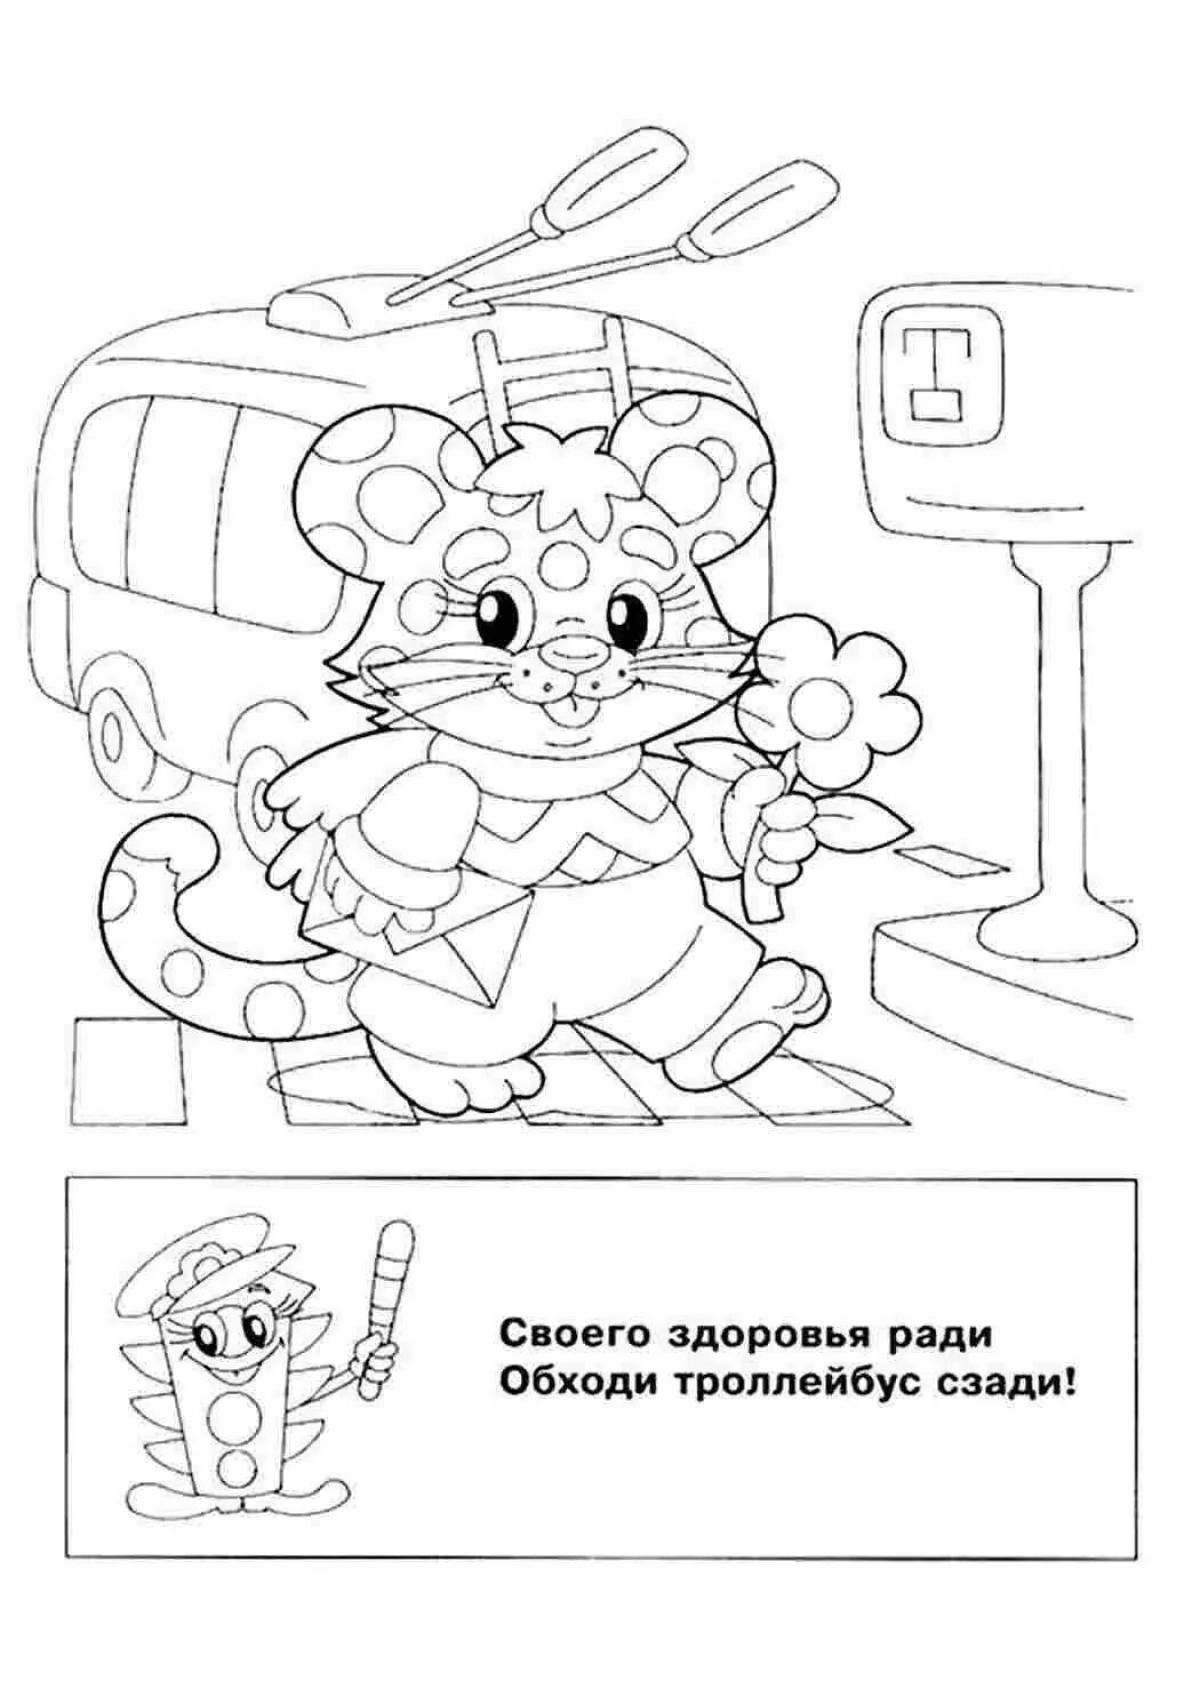 Fun coloring book traffic rules for 1st class